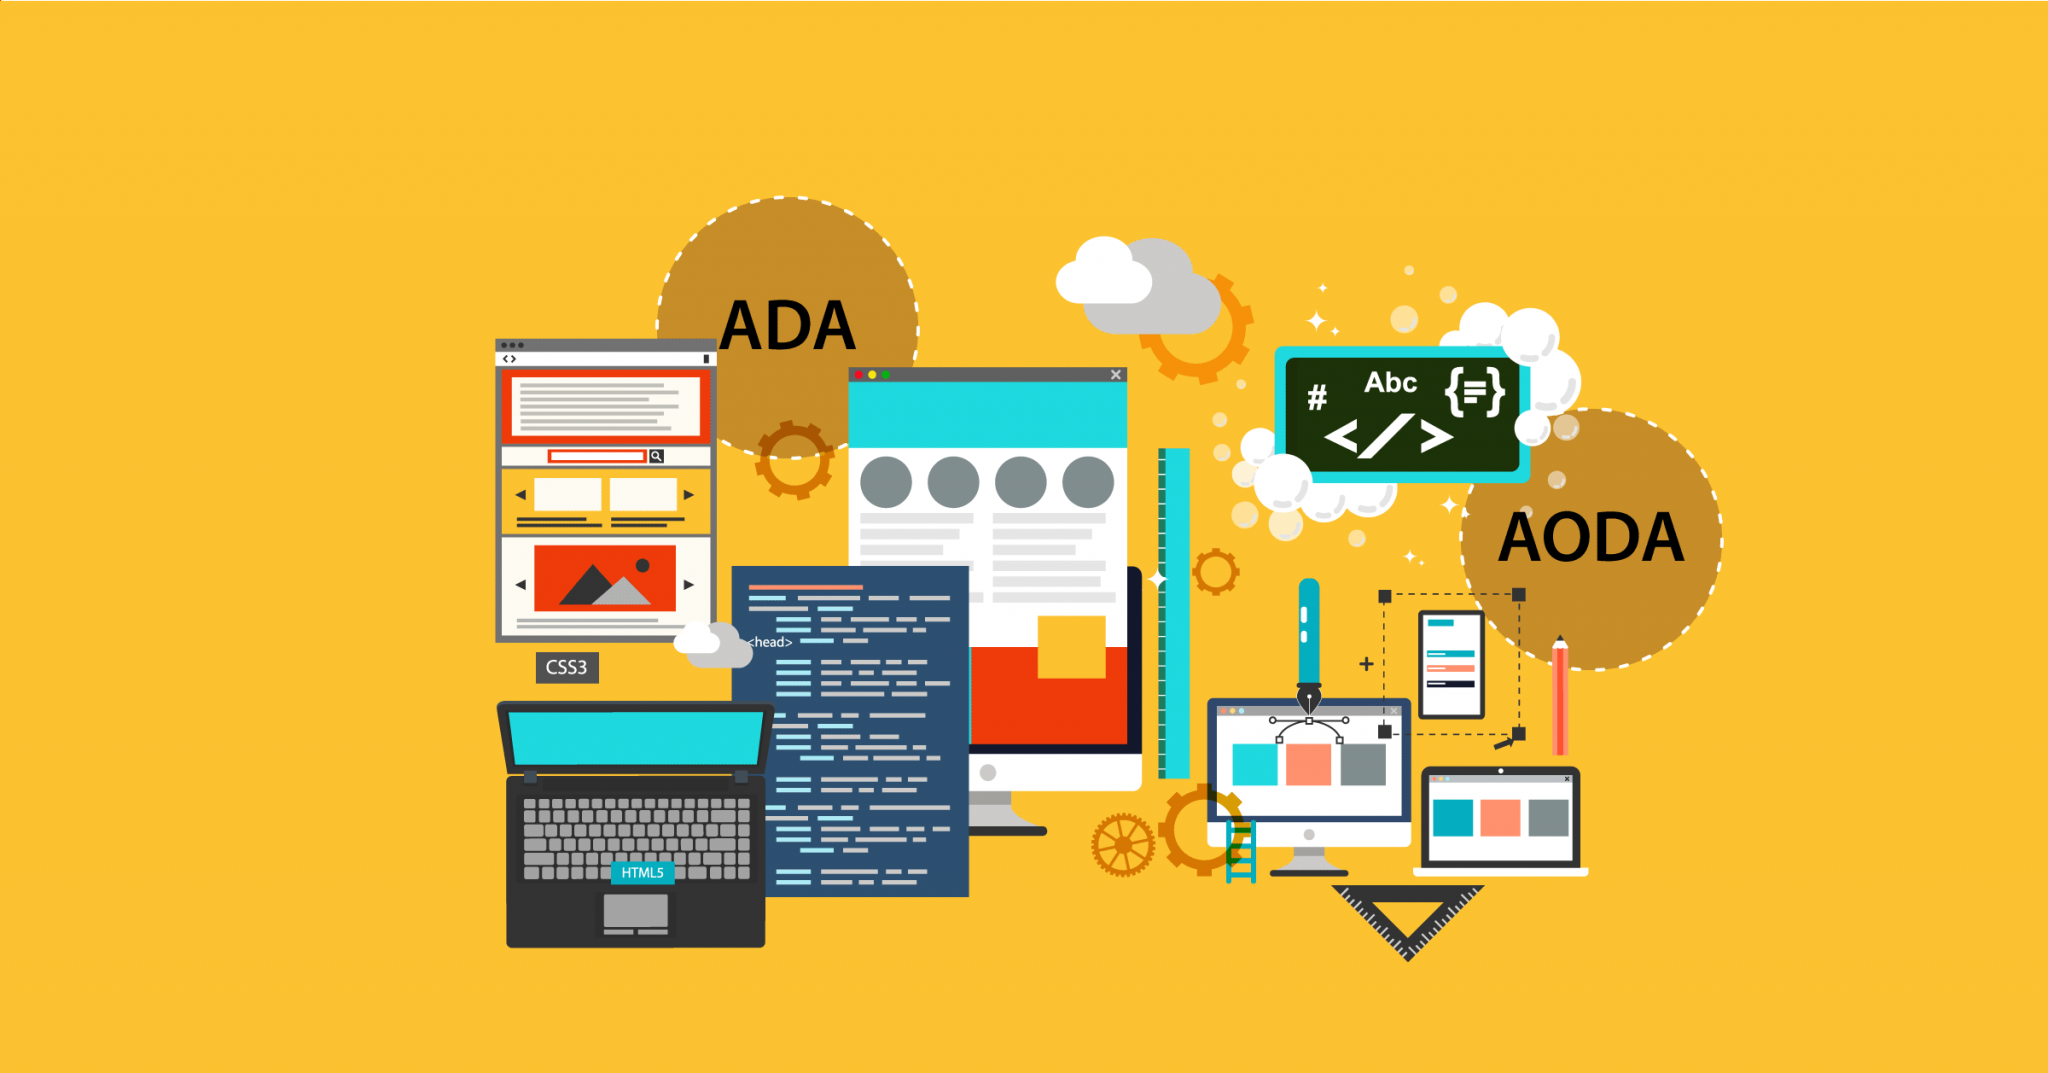 Illustrated webinar design showing multiple device and content types, tools and gears, and ADA and AODA symbols.